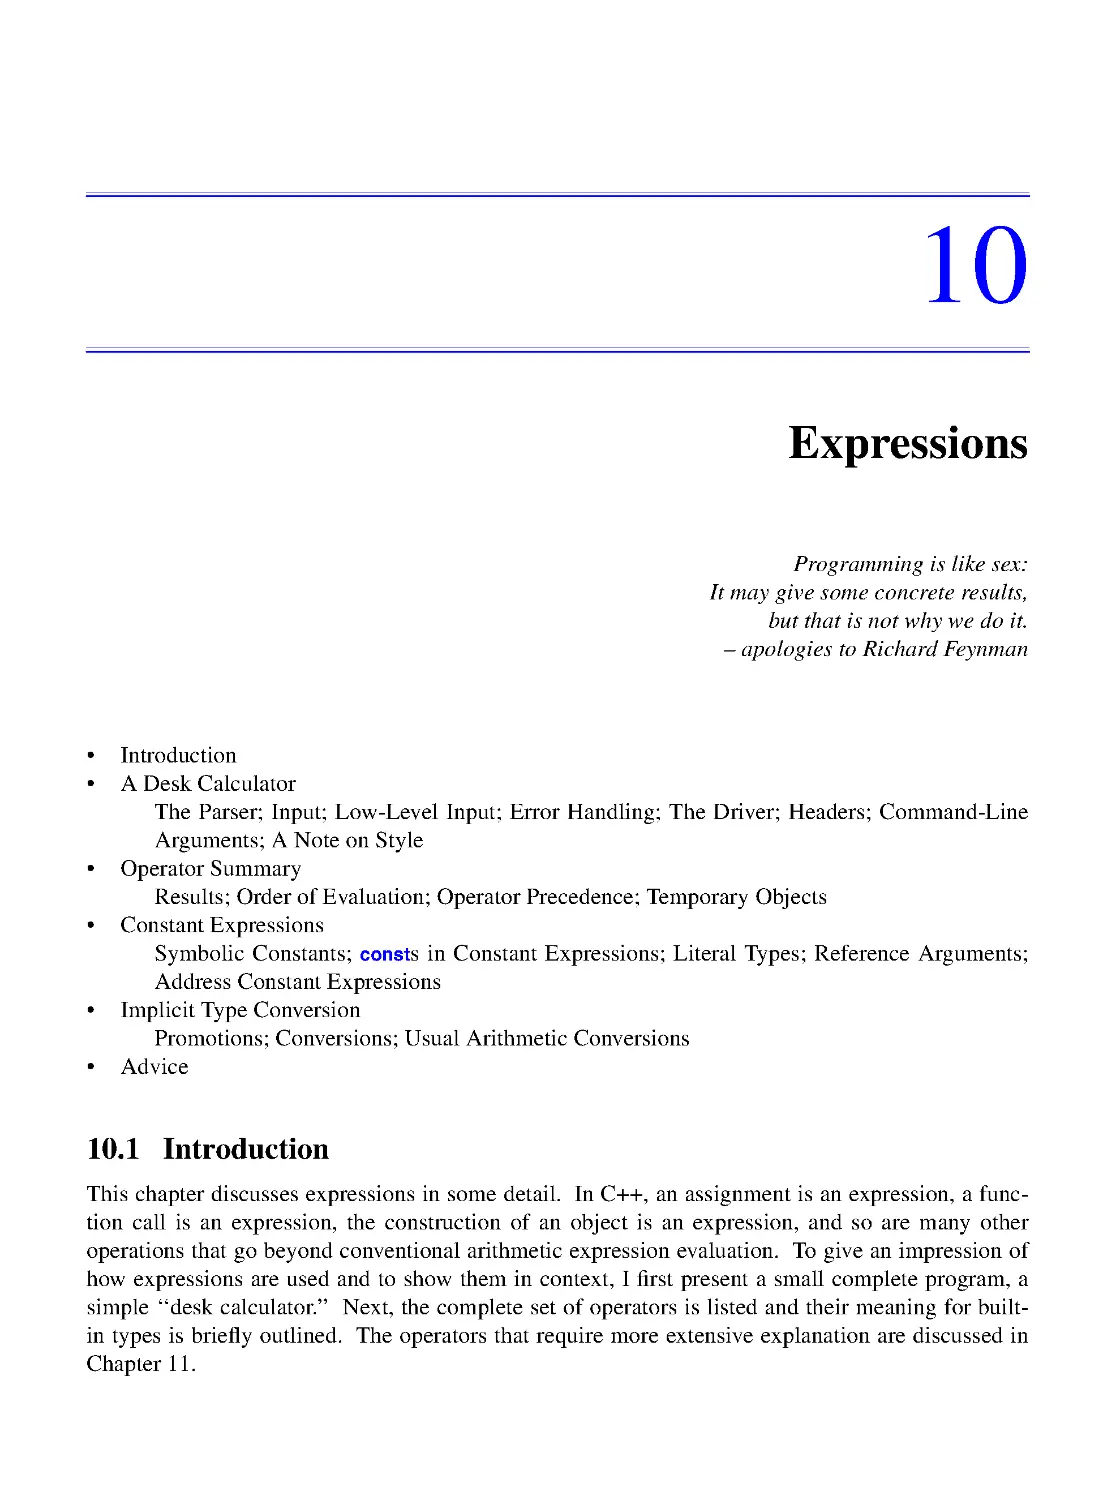 10. Expressions